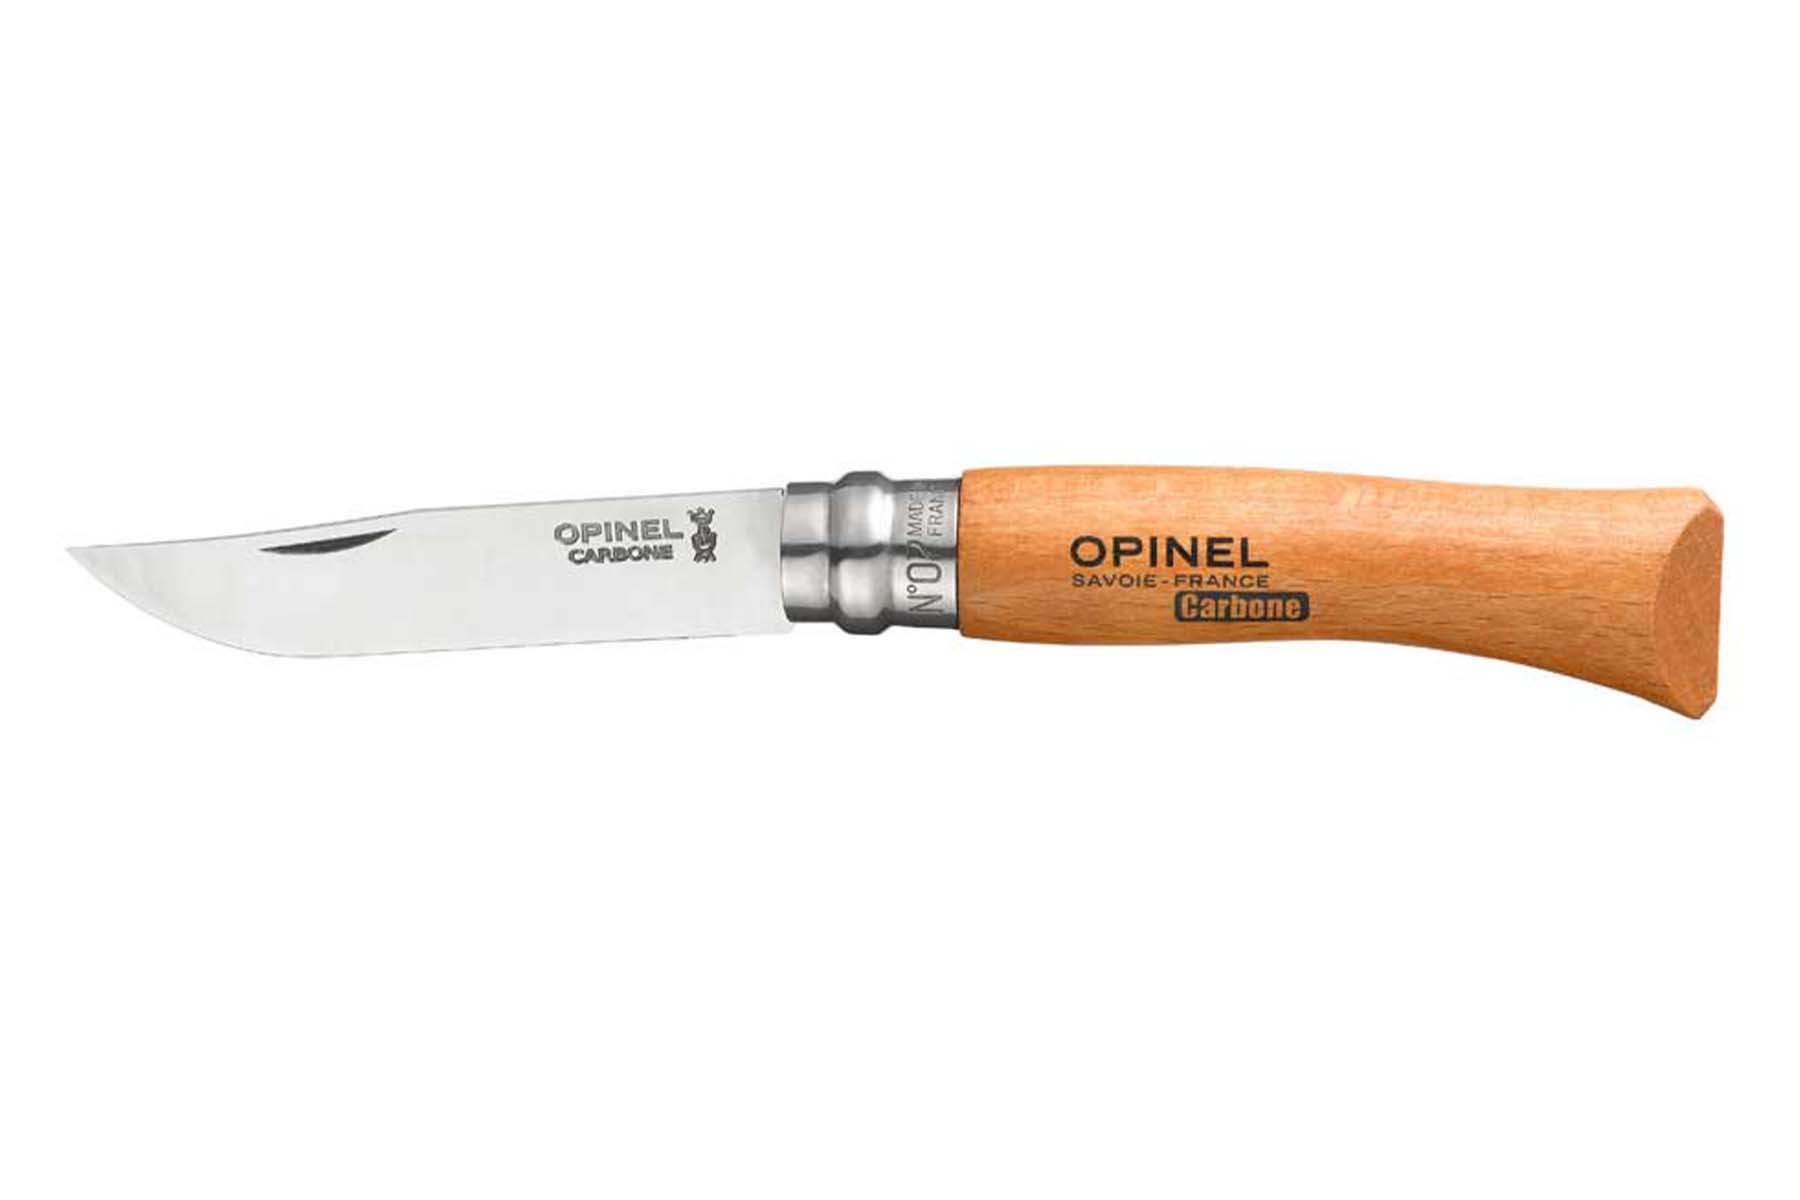 Couteau Opinel n°07 lame carbone